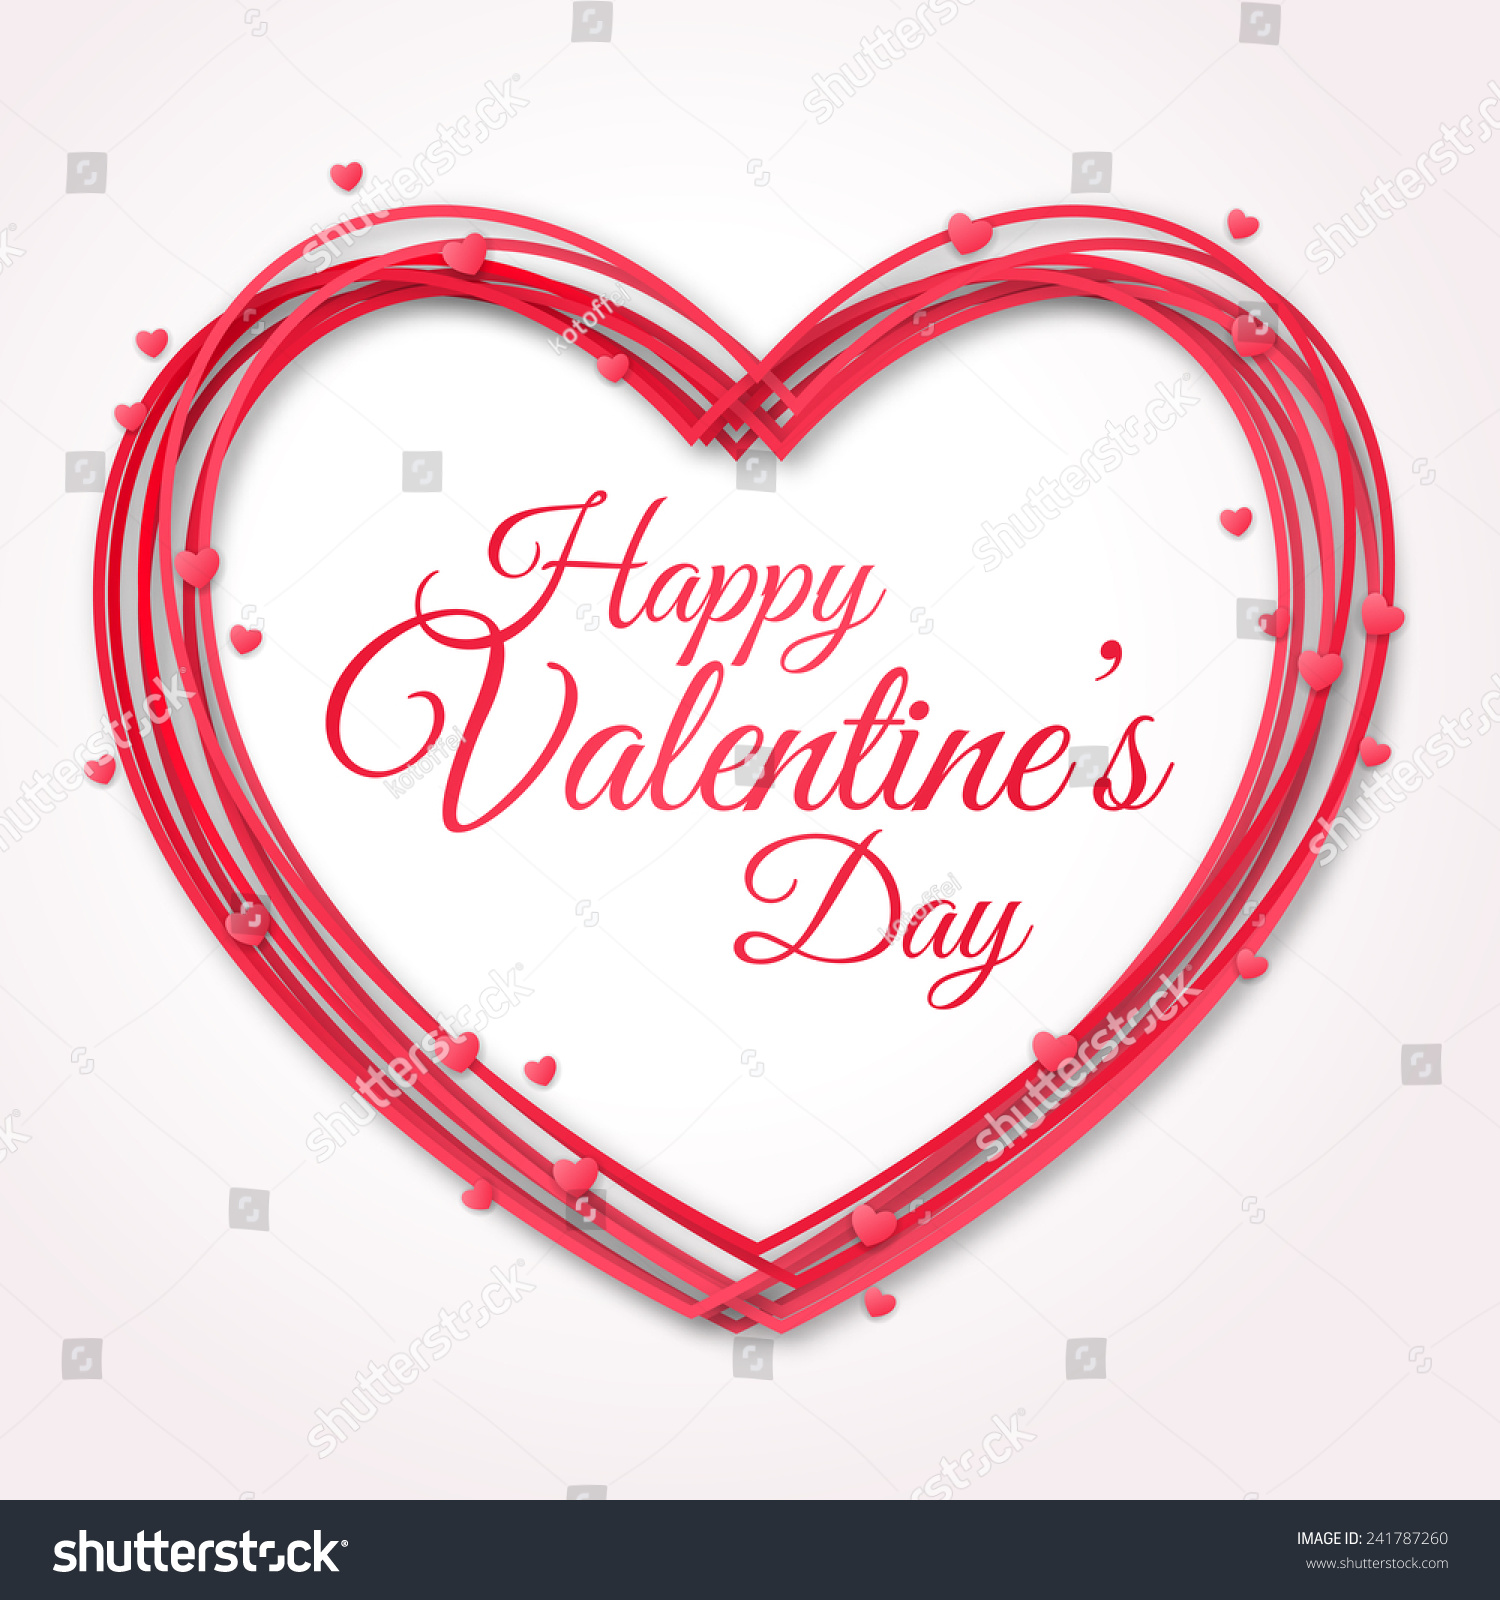 Happy Valentines Day Greeting Card. Vector Illustration. Heart Shape Design Template ...